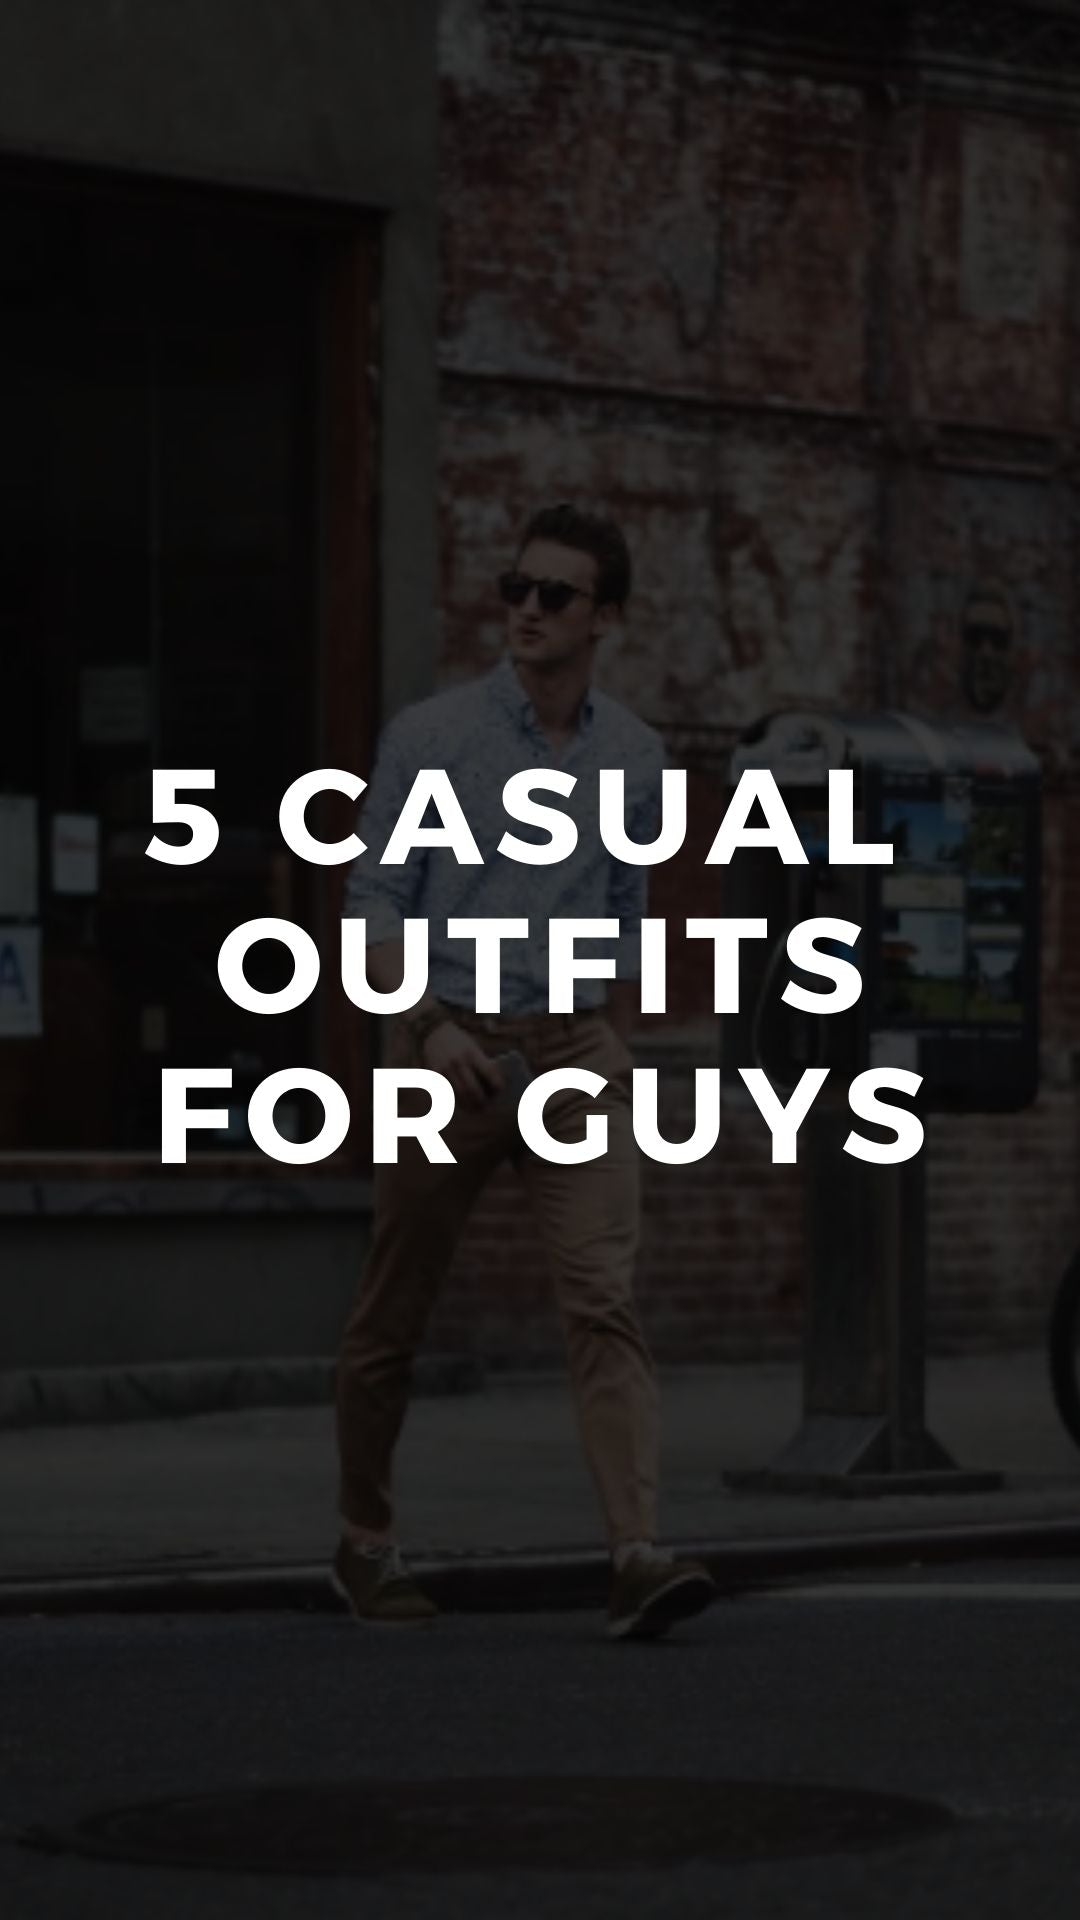 5 Outfits That Will Make You Look Way Cooler